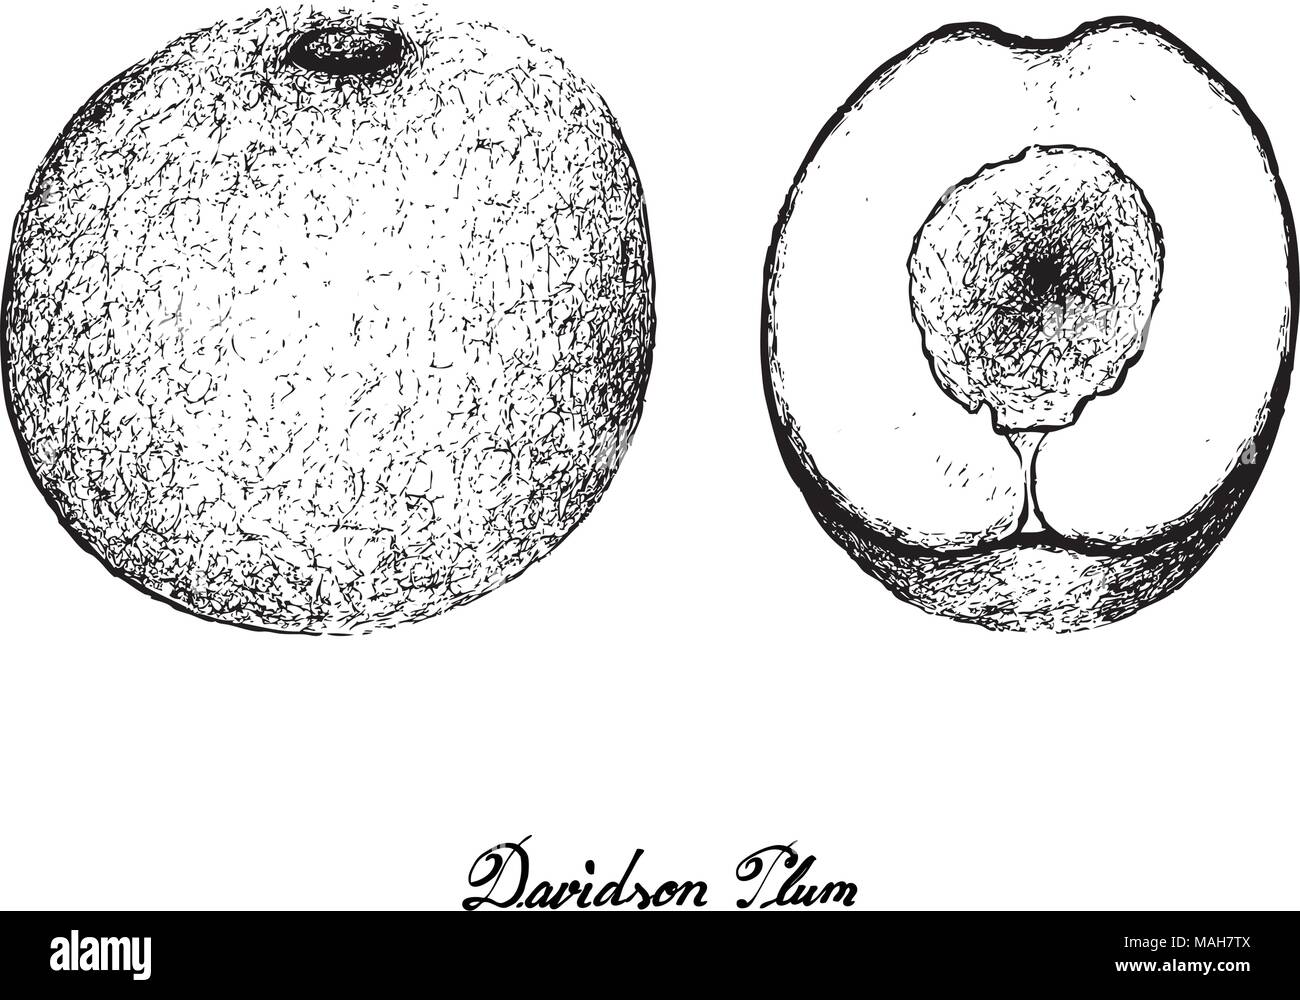 Exotic Fruits, Illustration of Hand Drawn Sketch Davidson Plums or Davidsonia Fruits Isolated on White Background. Stock Vector